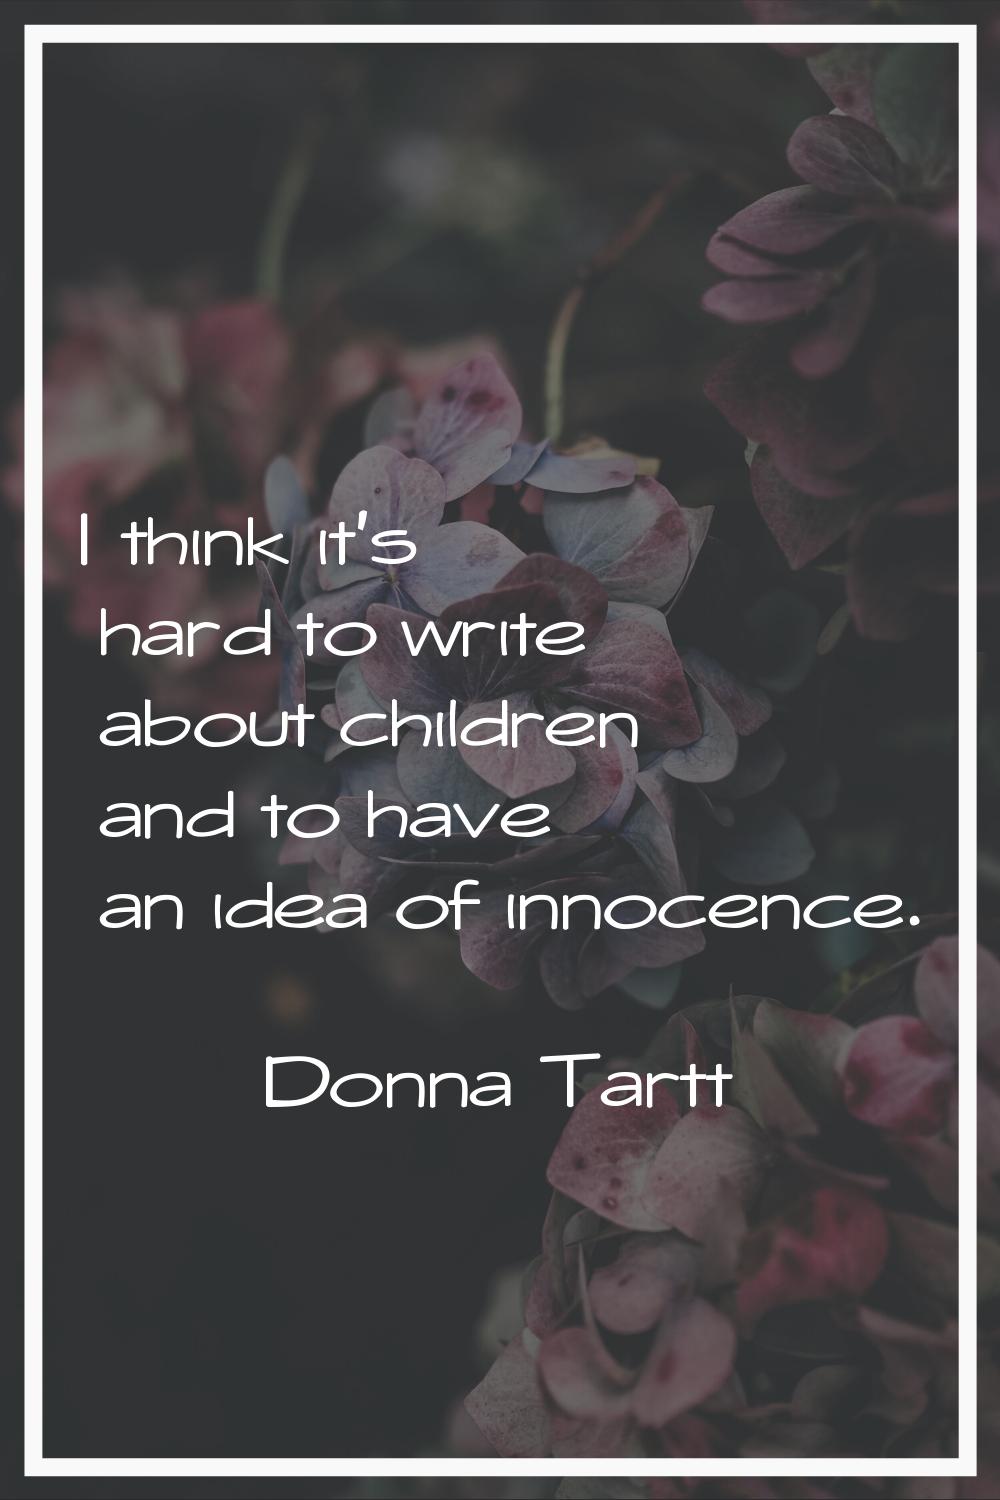 I think it's hard to write about children and to have an idea of innocence.